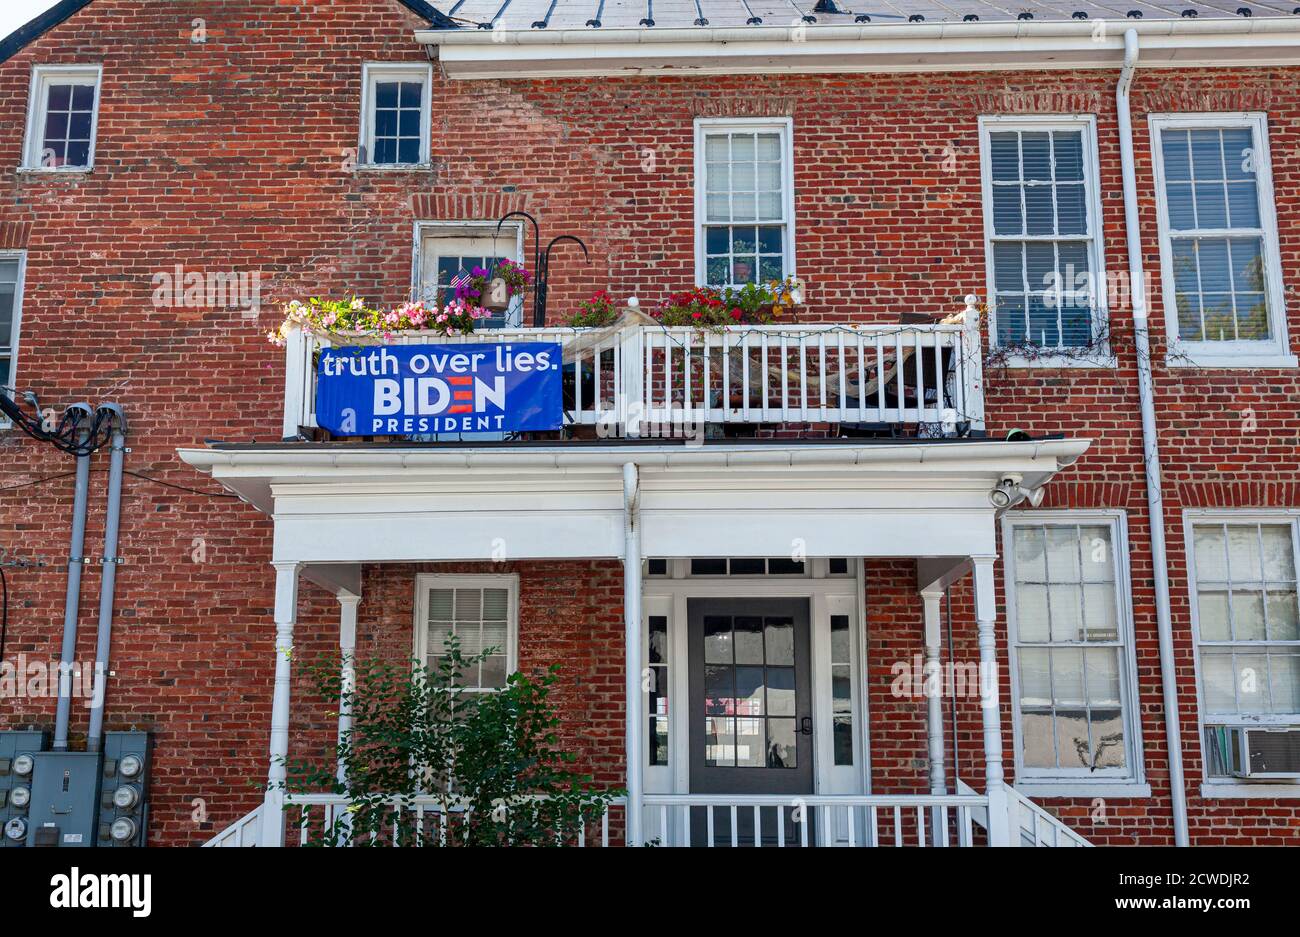 Berryville, VA, USA 09/27/2020: A blue Biden for President banner is attached to the wooden railings of the second floor balcony at a vintage brick ho Stock Photo